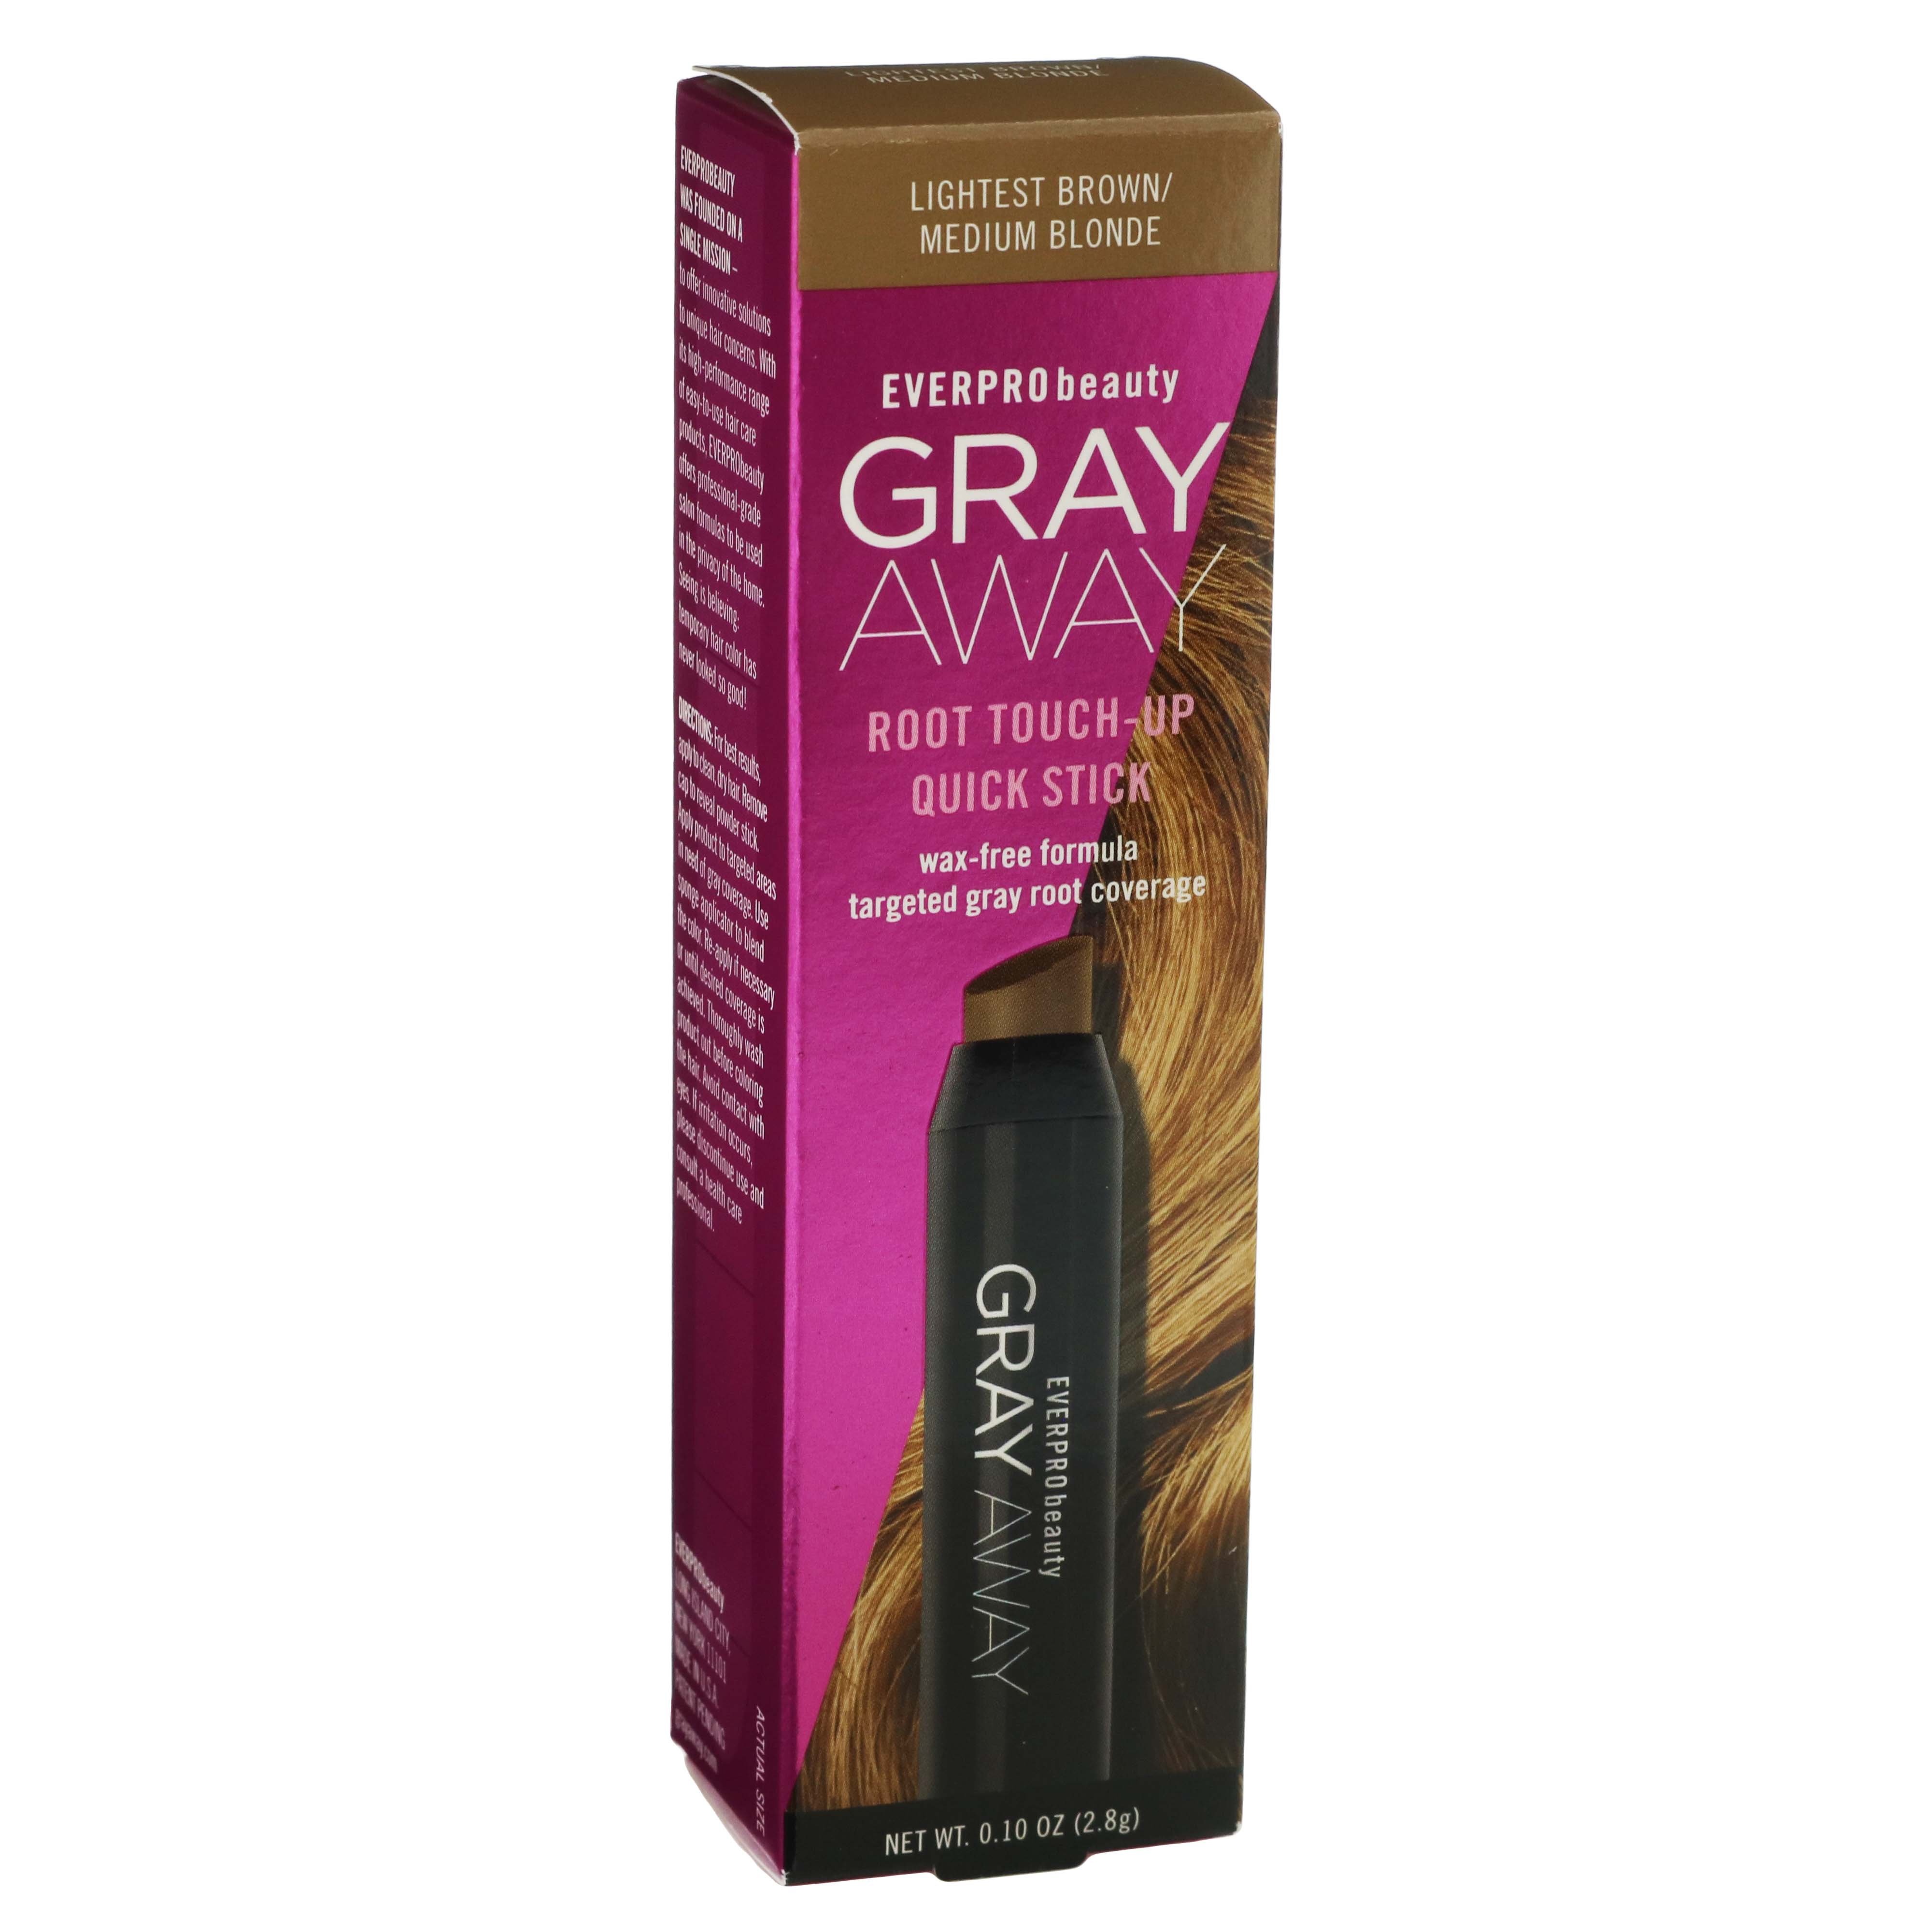 Everpro Gray Away Root Touch Up Lightest Brown Medium Blonde Stick Shop Hair Color At H E B 8712